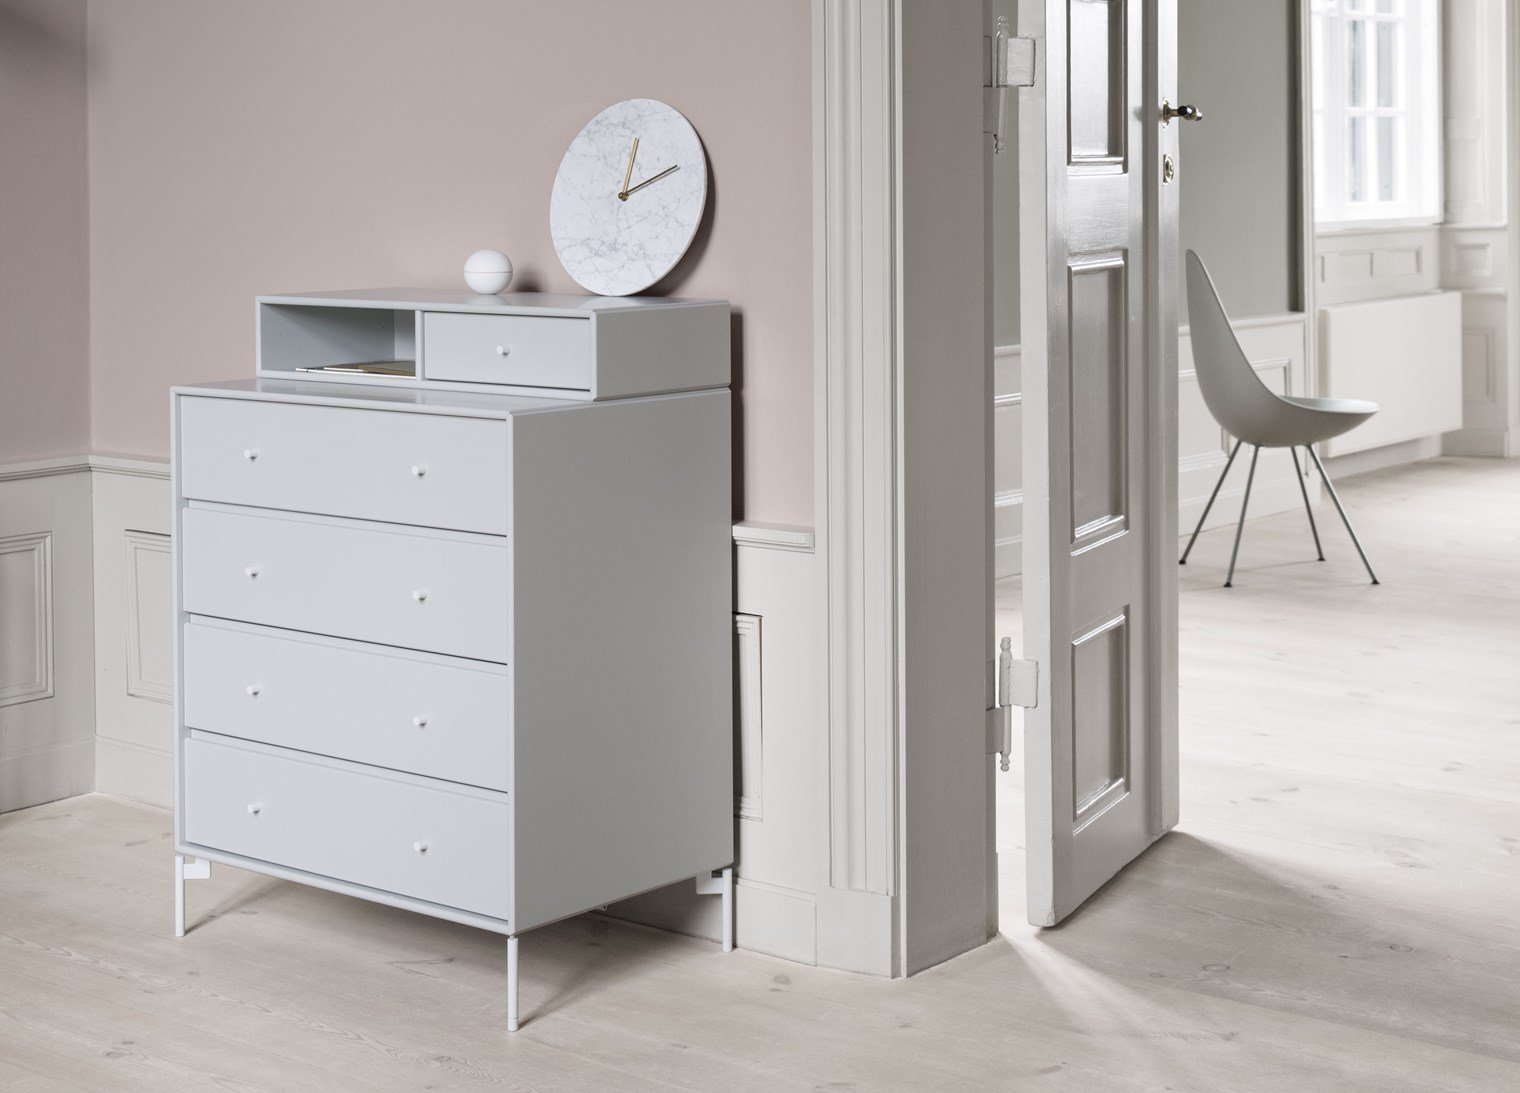 Montana Keep Bre of Drawers With Suspension Rail, Snow White